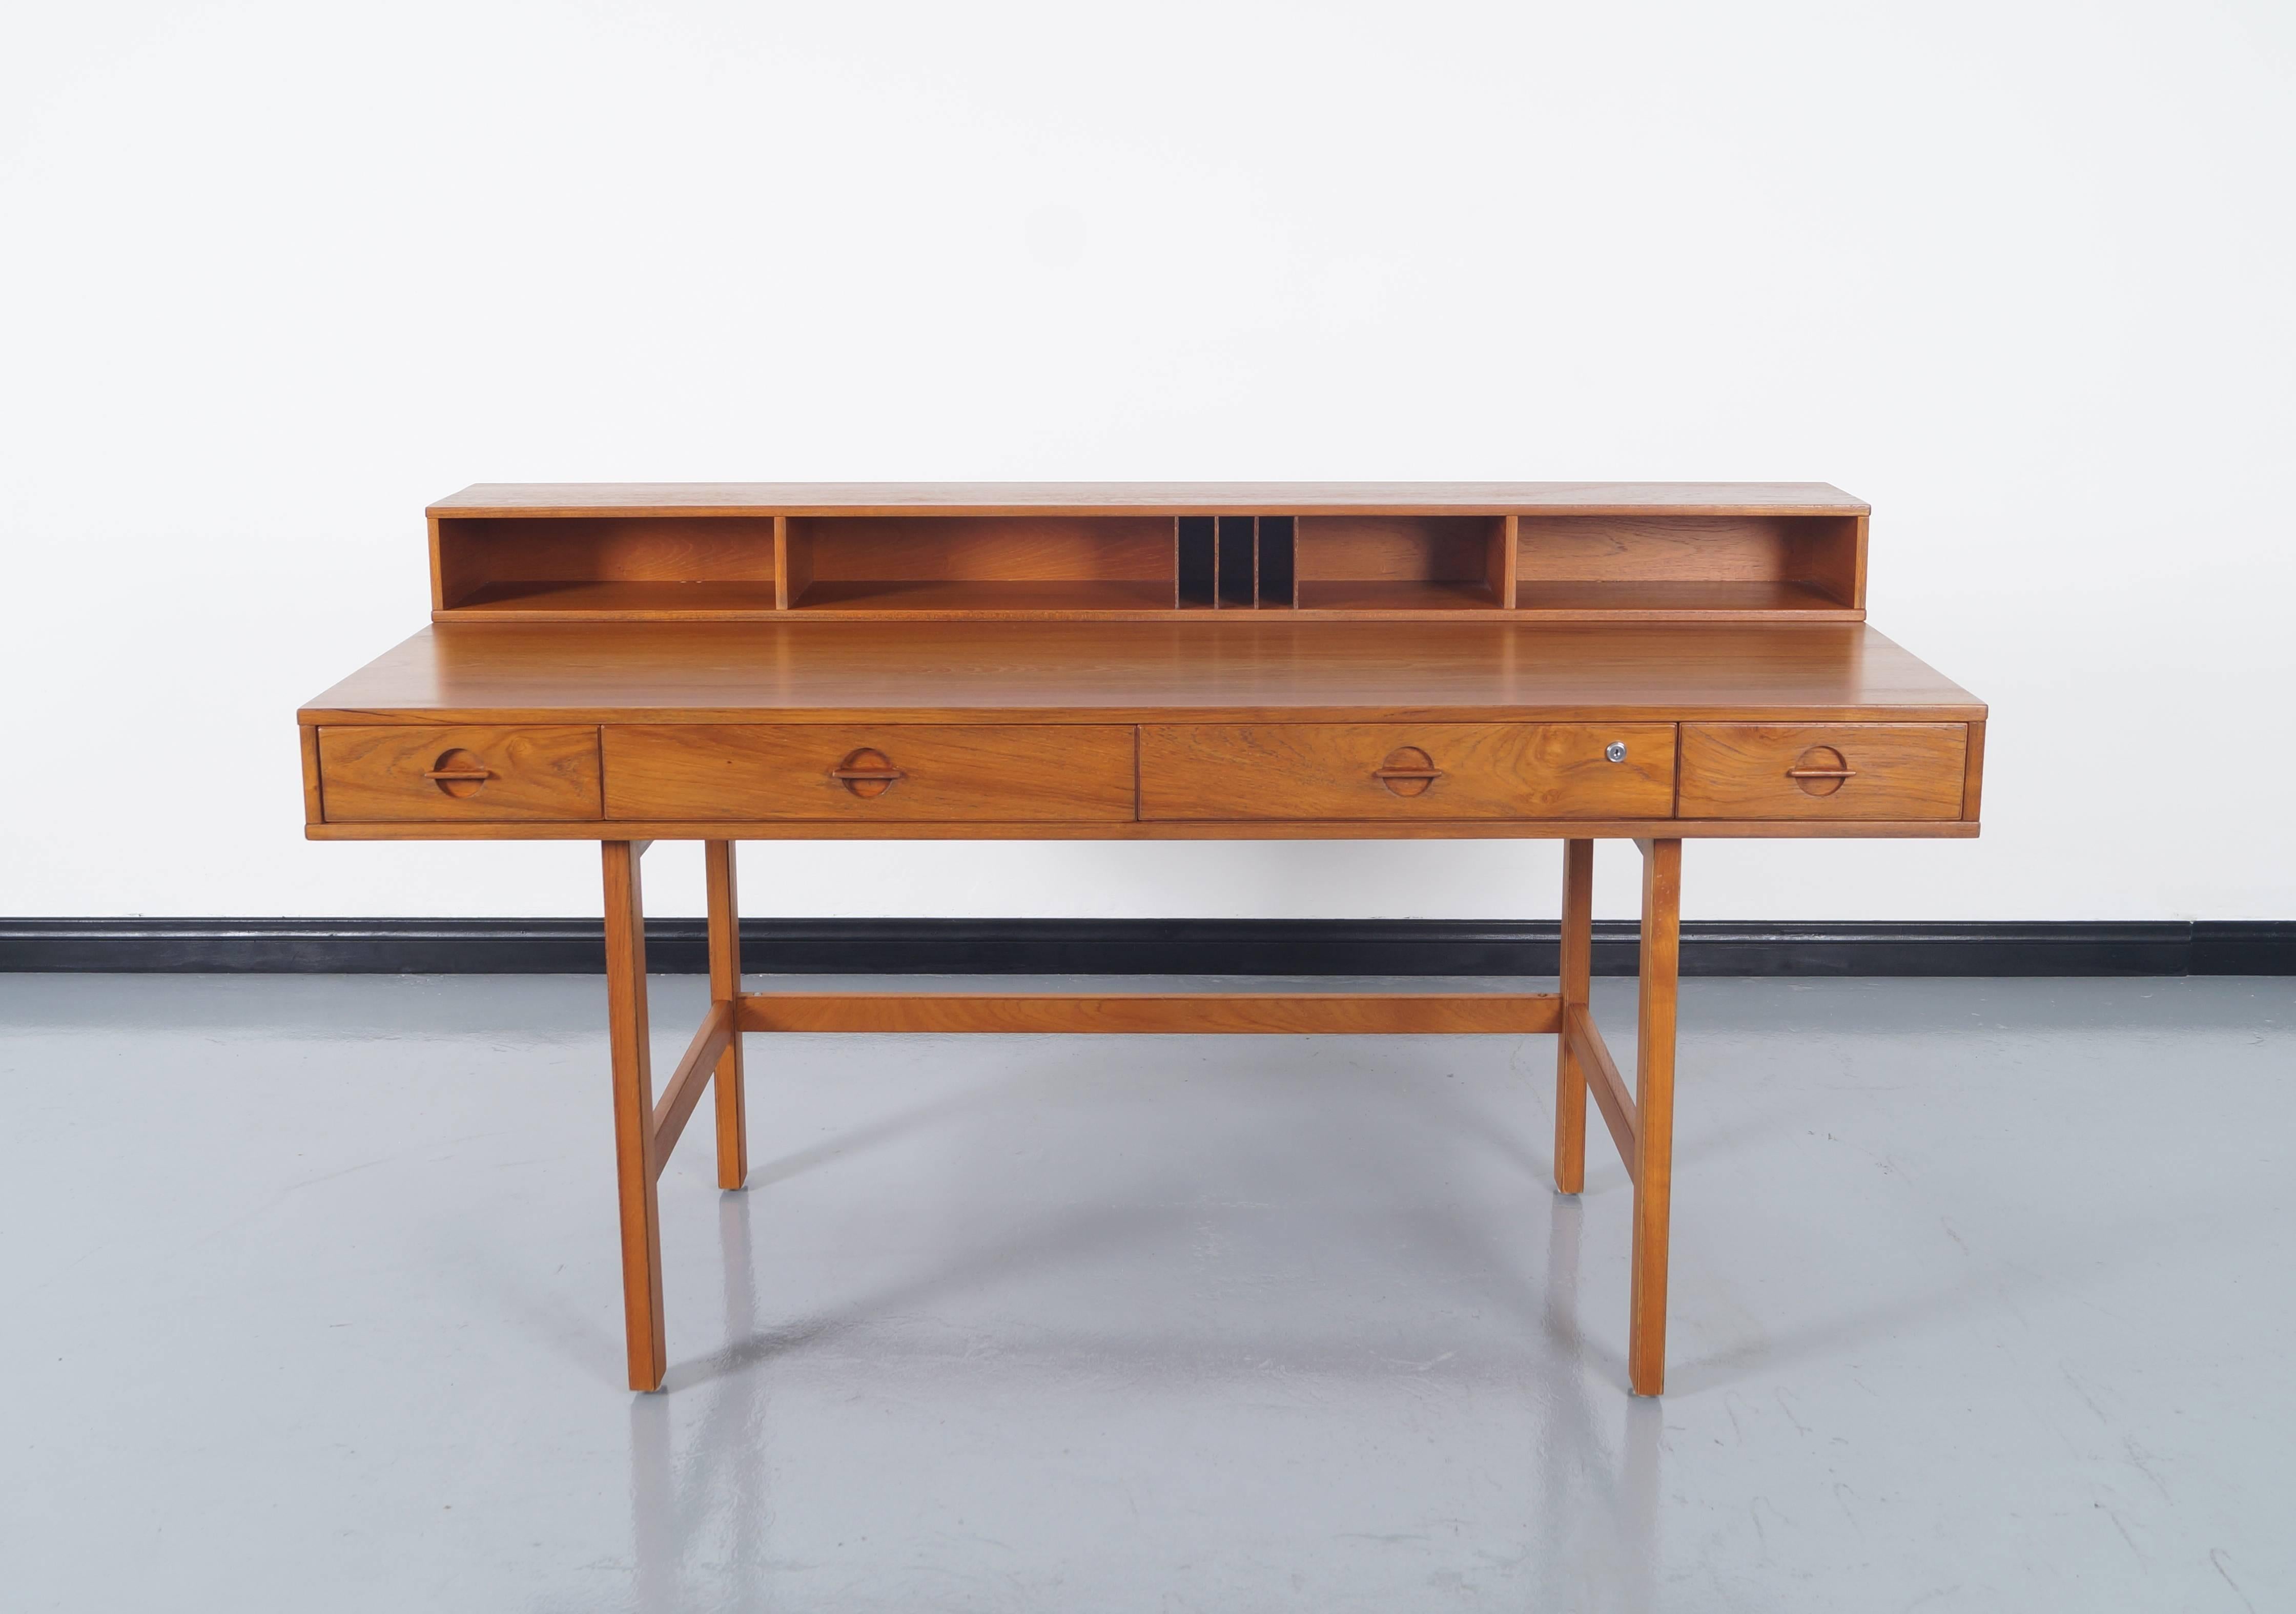 Danish teak desk has a flip-top to extend the desk top for more working space. Contains four dovetail drawers and storage slot in front and additional storage space in the back. Measures: Expands up to 38